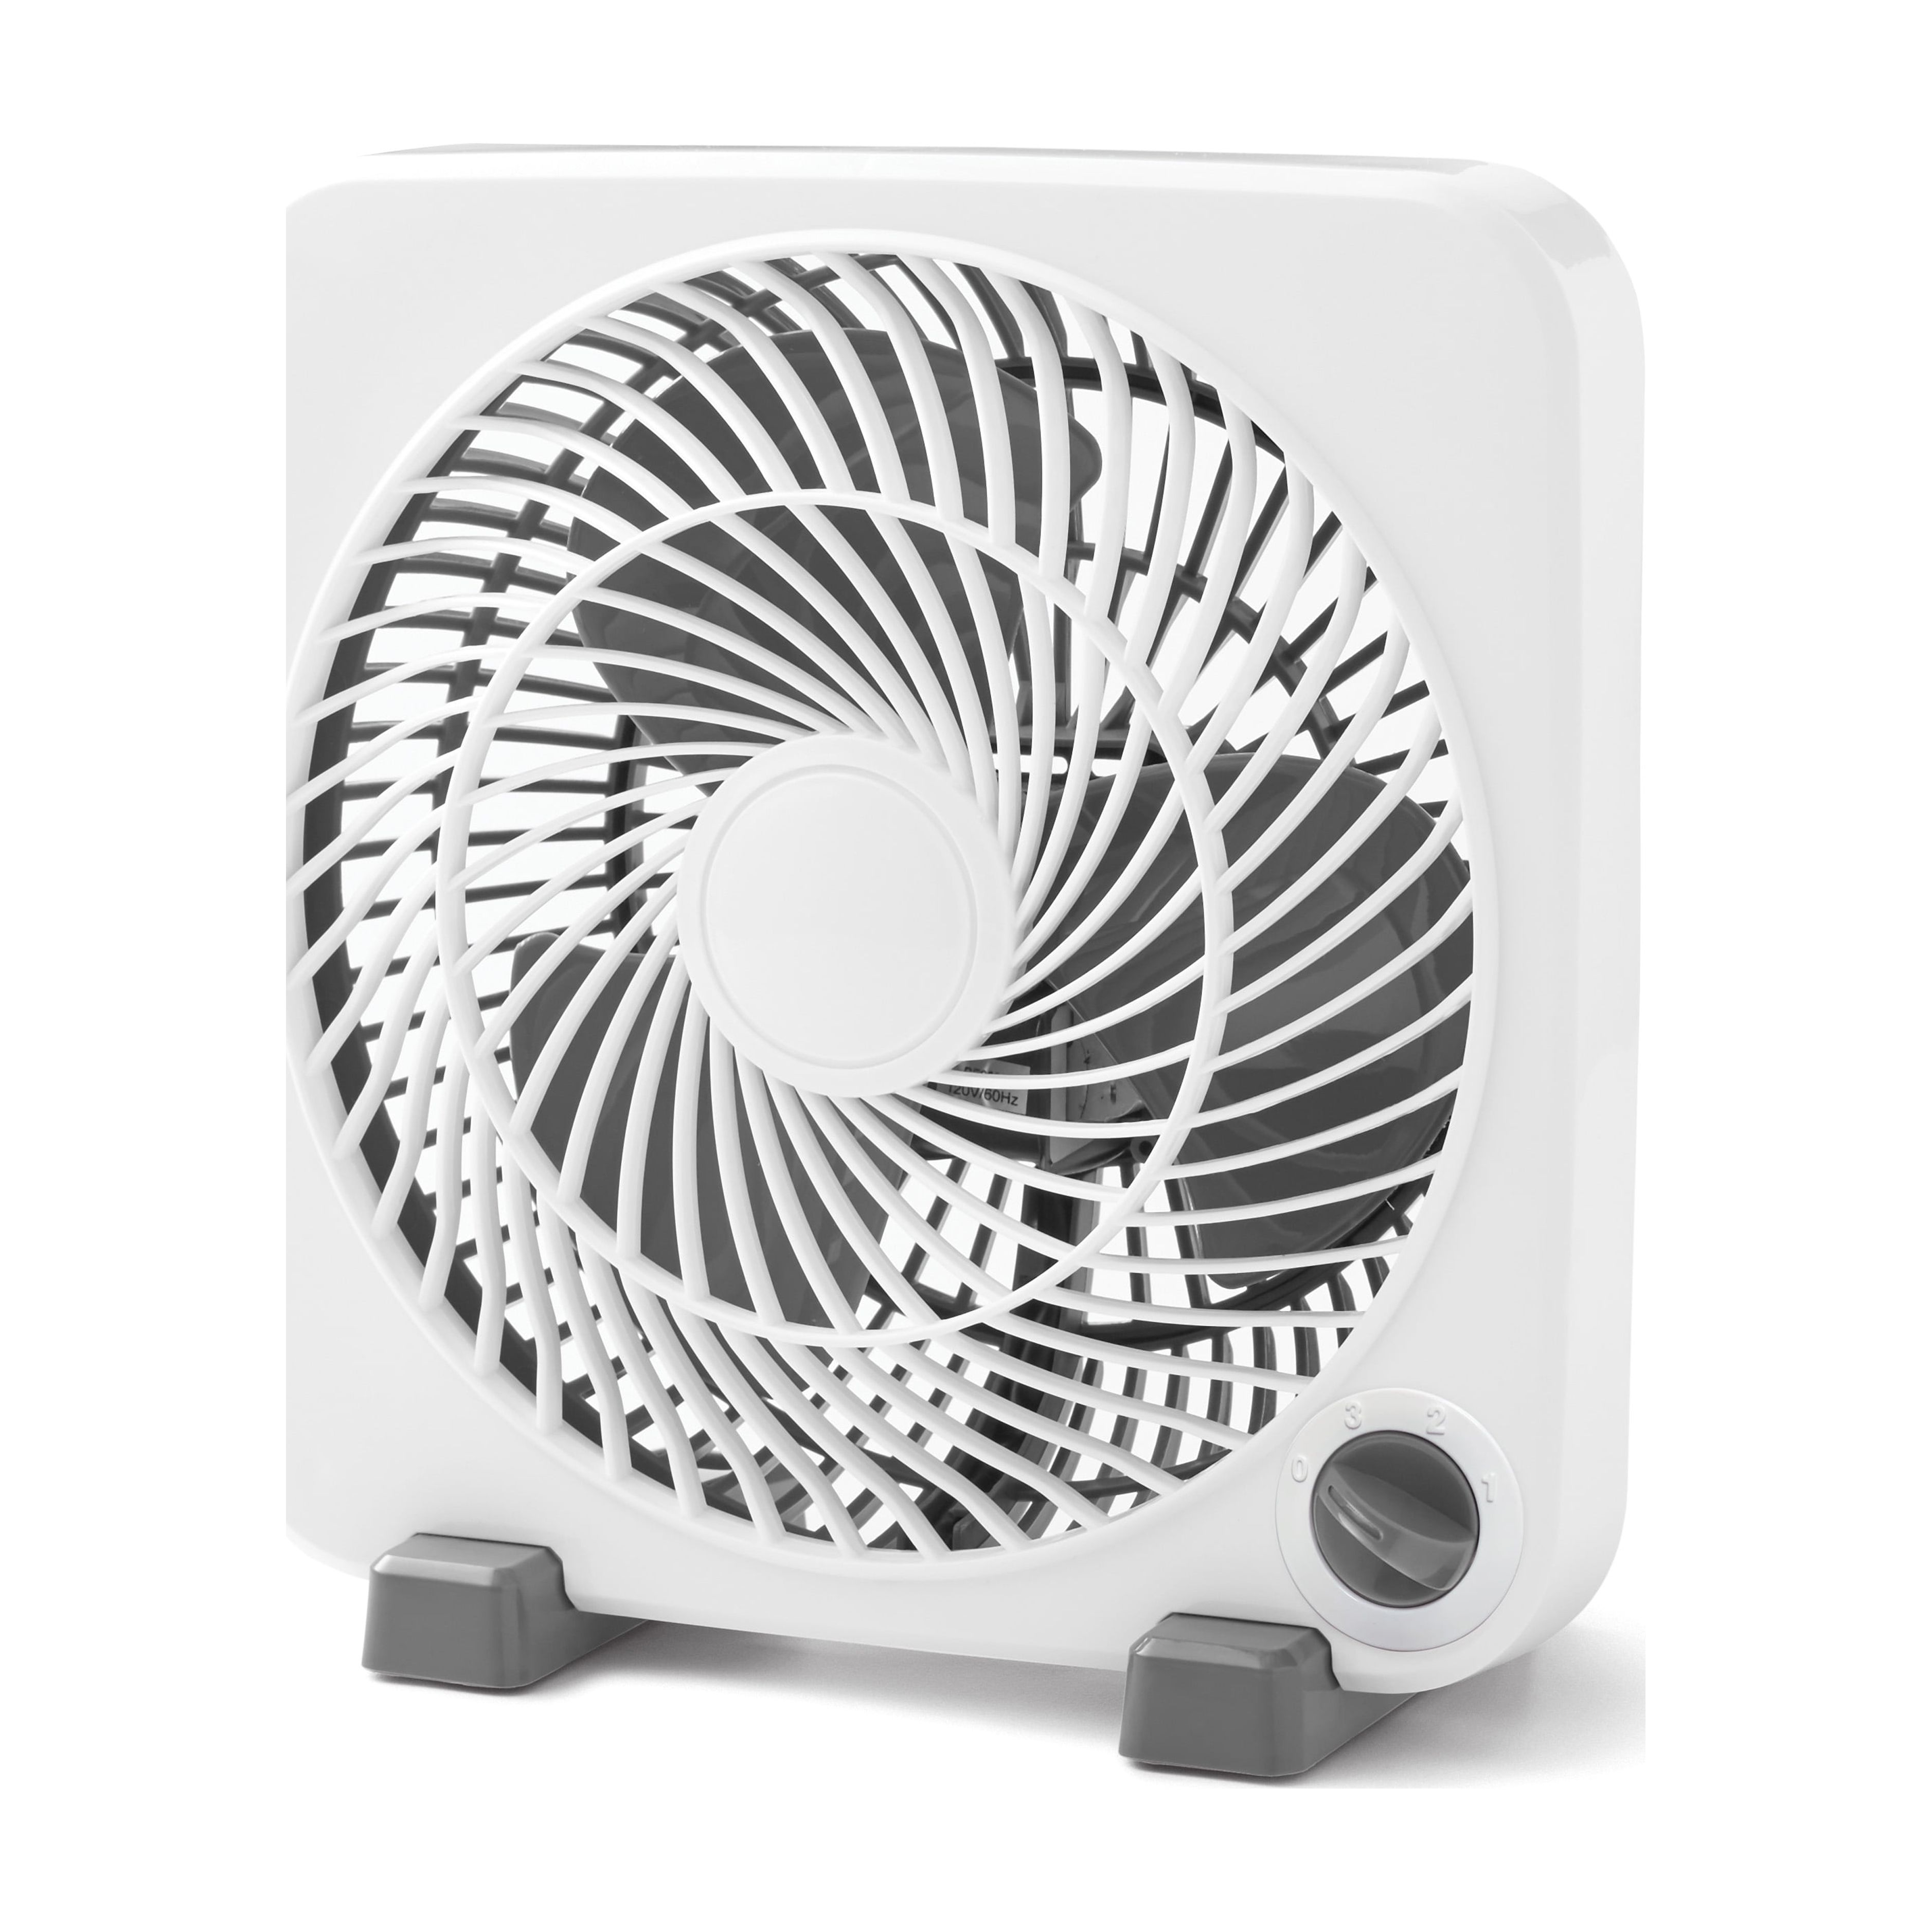 Mainstays 9inch Personal Desktop Fan with 3 Speeds, White - image 1 of 9